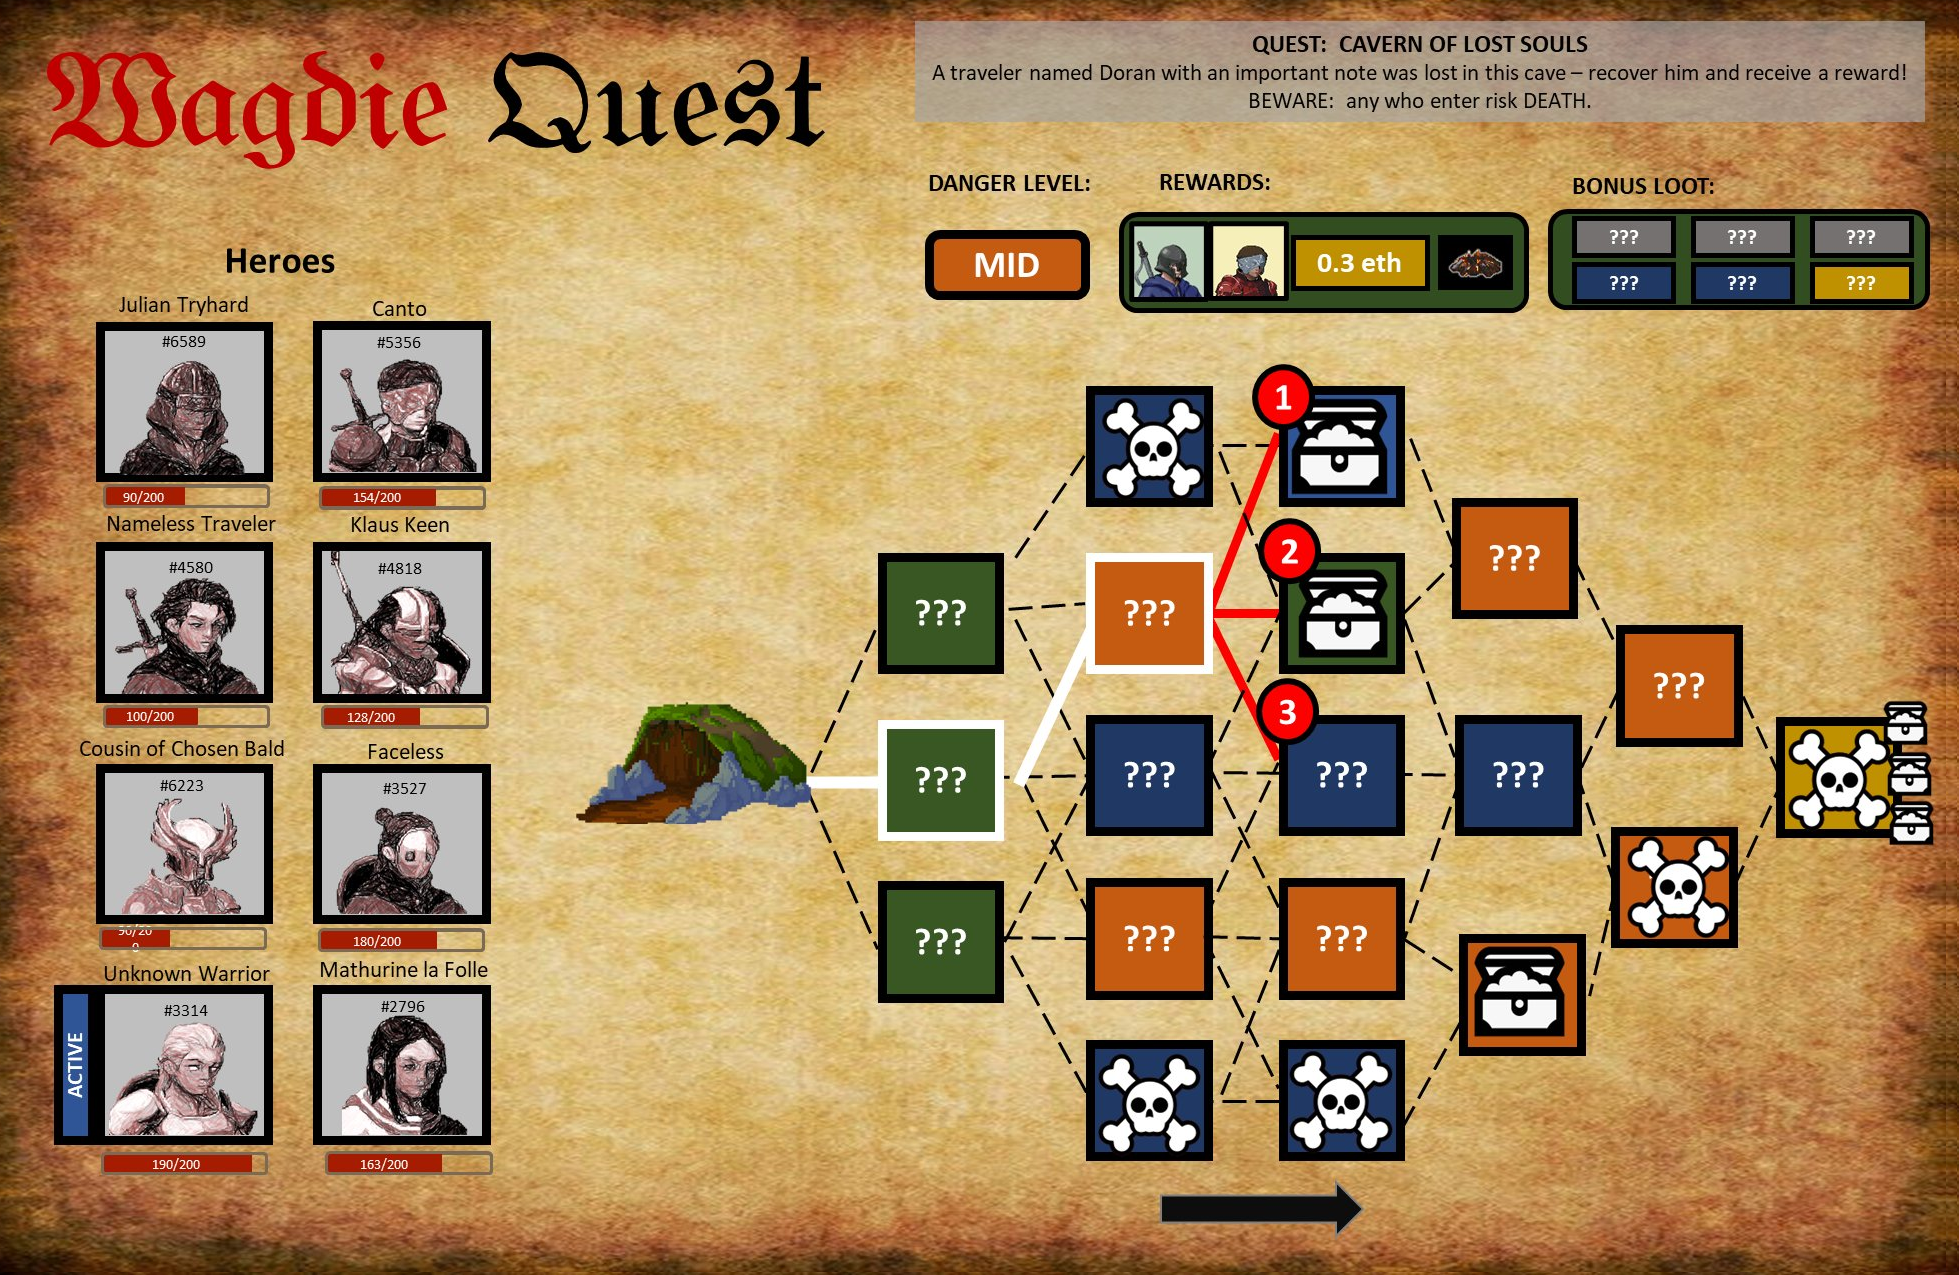 wagdie_quest_08.png